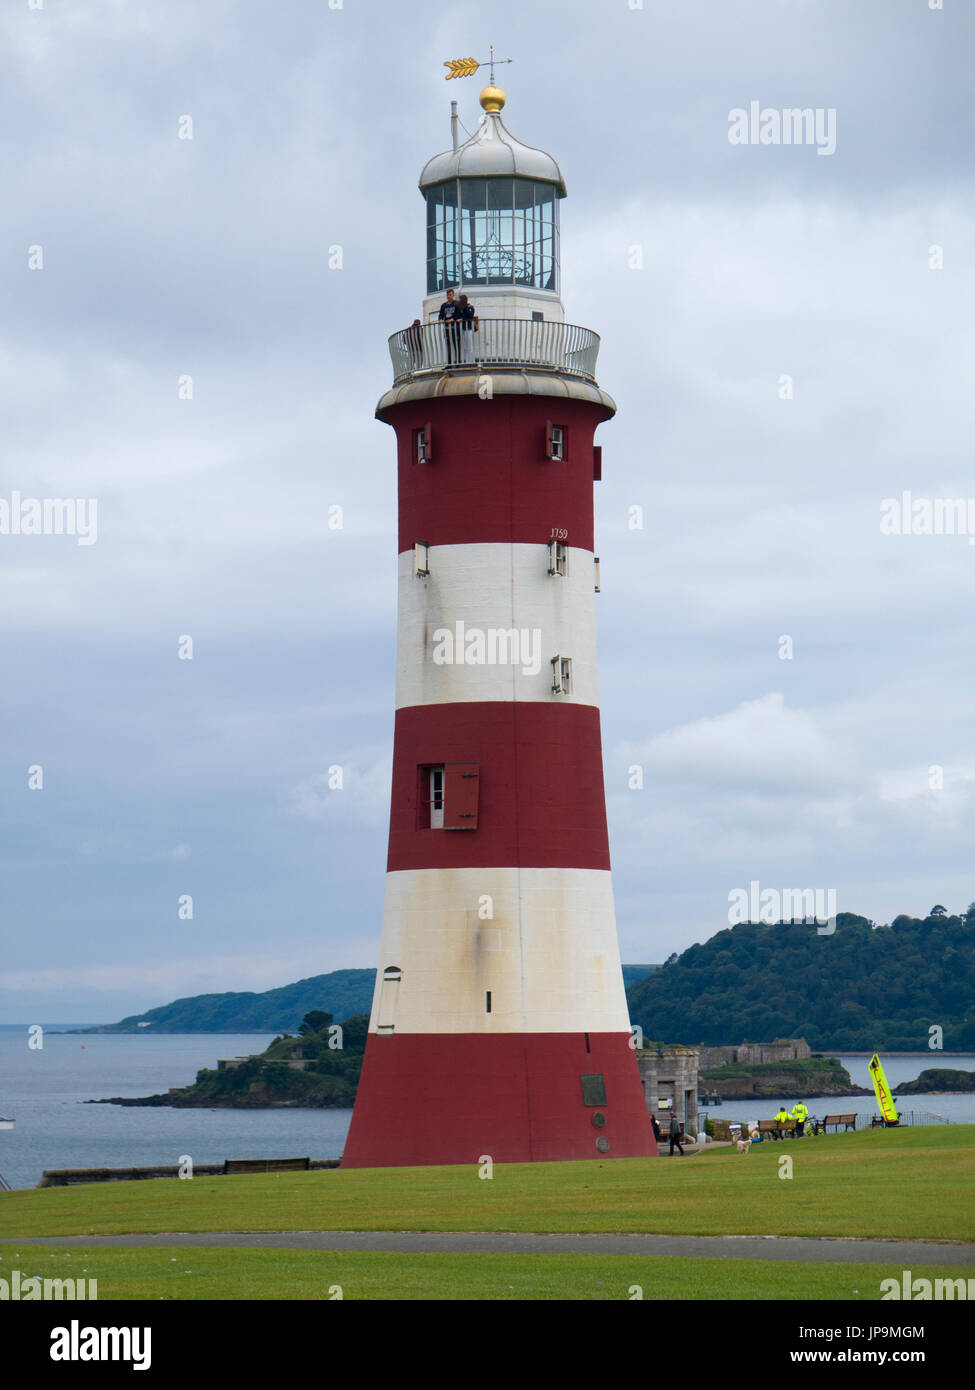 Smeaton's Tower Plymouth Hoe Banque D'Images